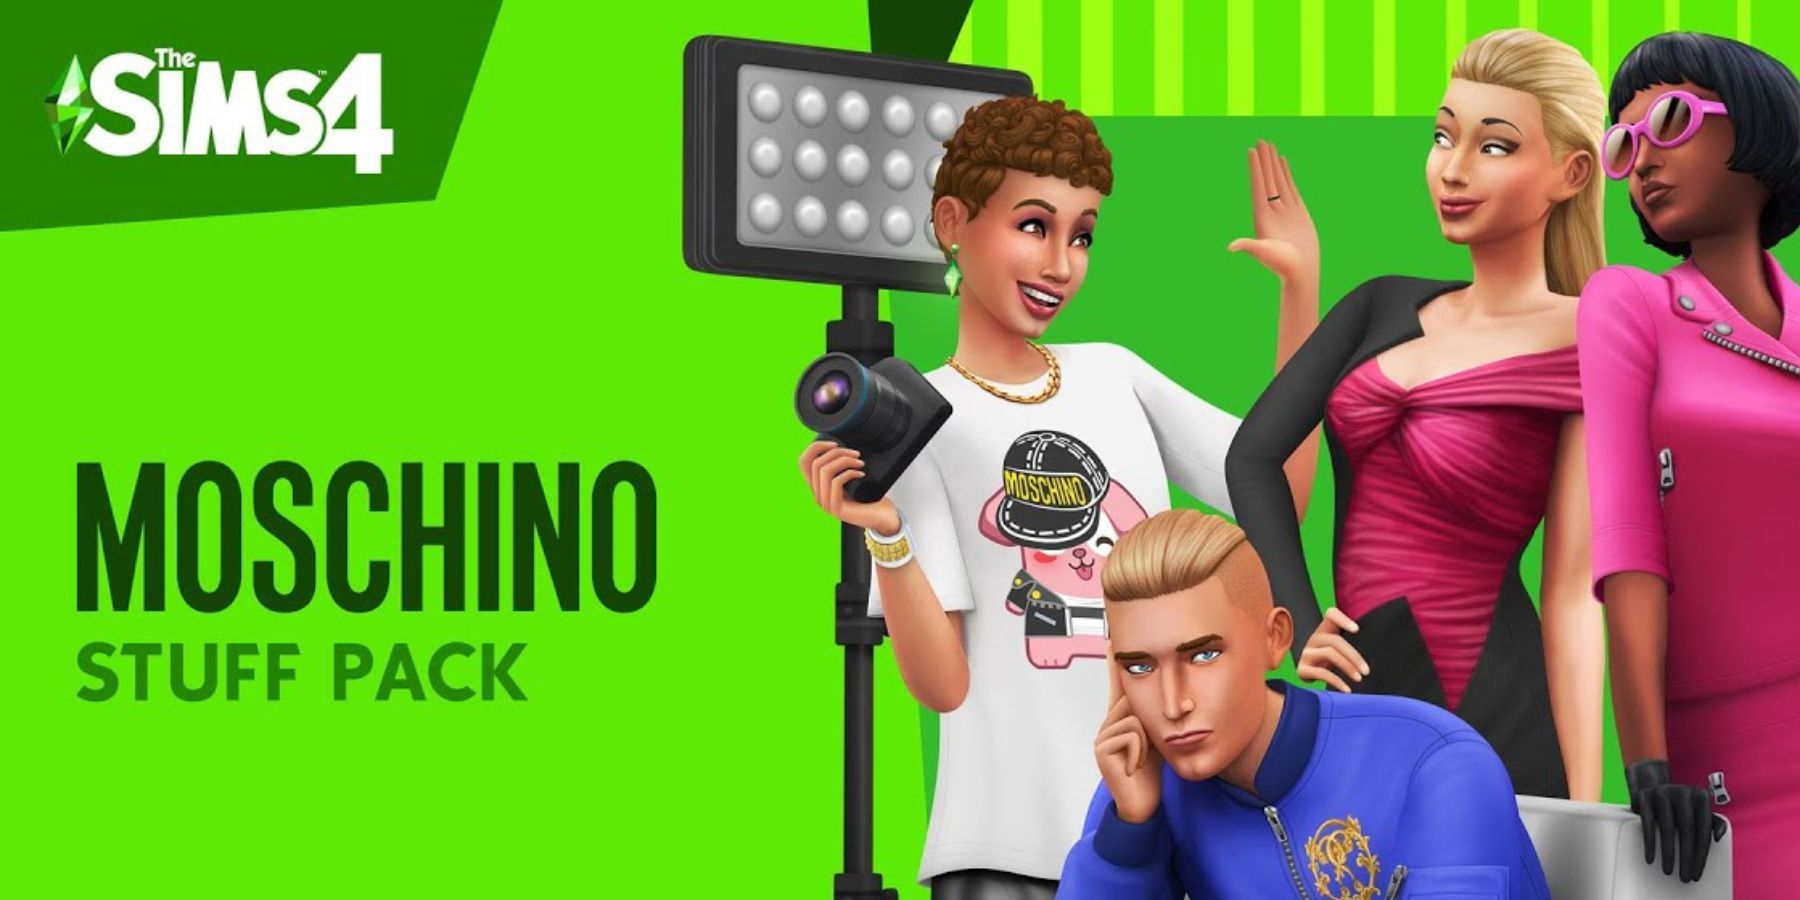 The Sims 4 Moschino 